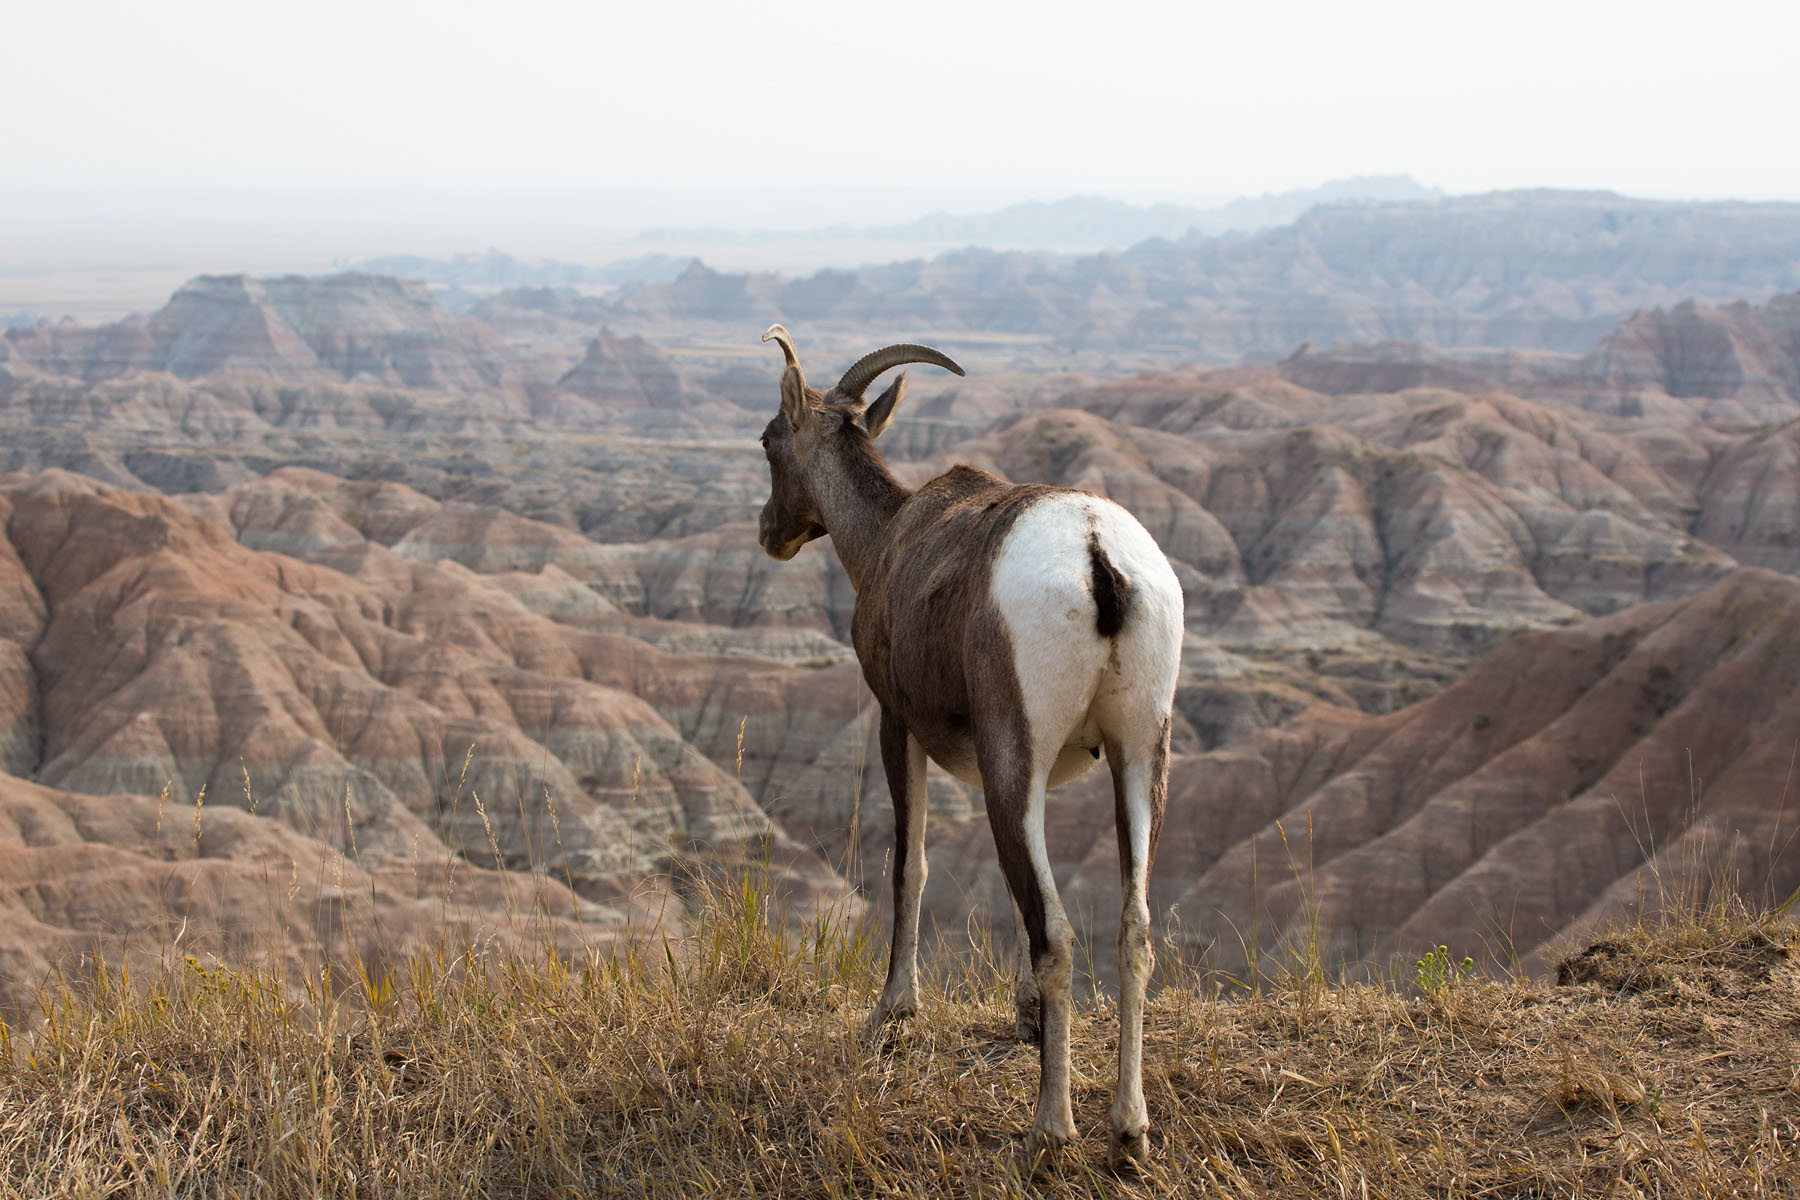 Bighorn ewe at the edge of a cliff, Badlands National Park.  Click for next photo.